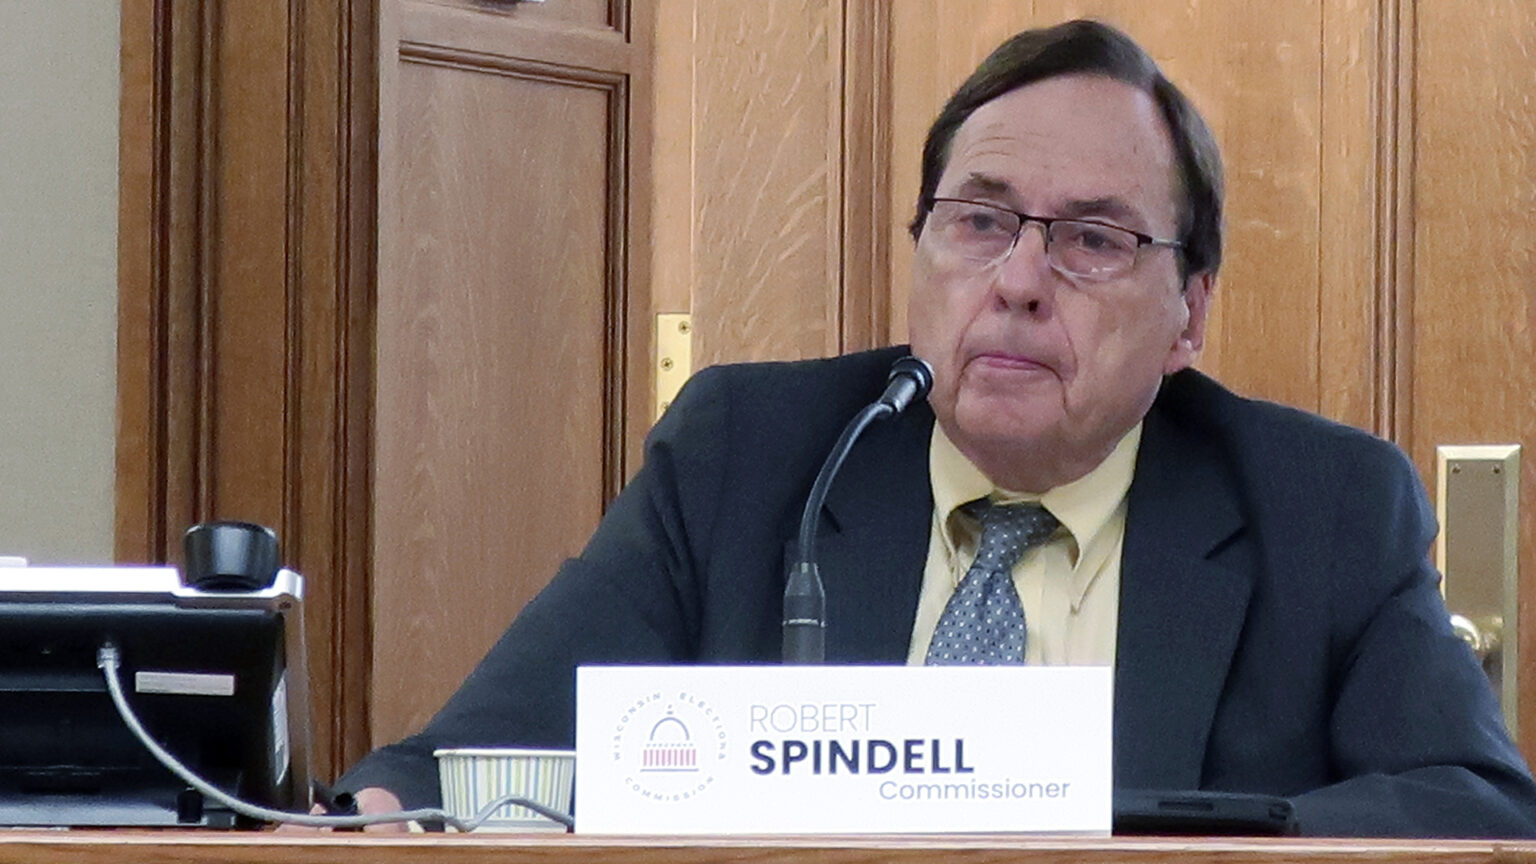 Robert Spindell sits and speaks into a microphone on a table with a corded office phone, paper cup and name sign reading Robert Spindell and Commissioner on its surface, with wood doors in the background.